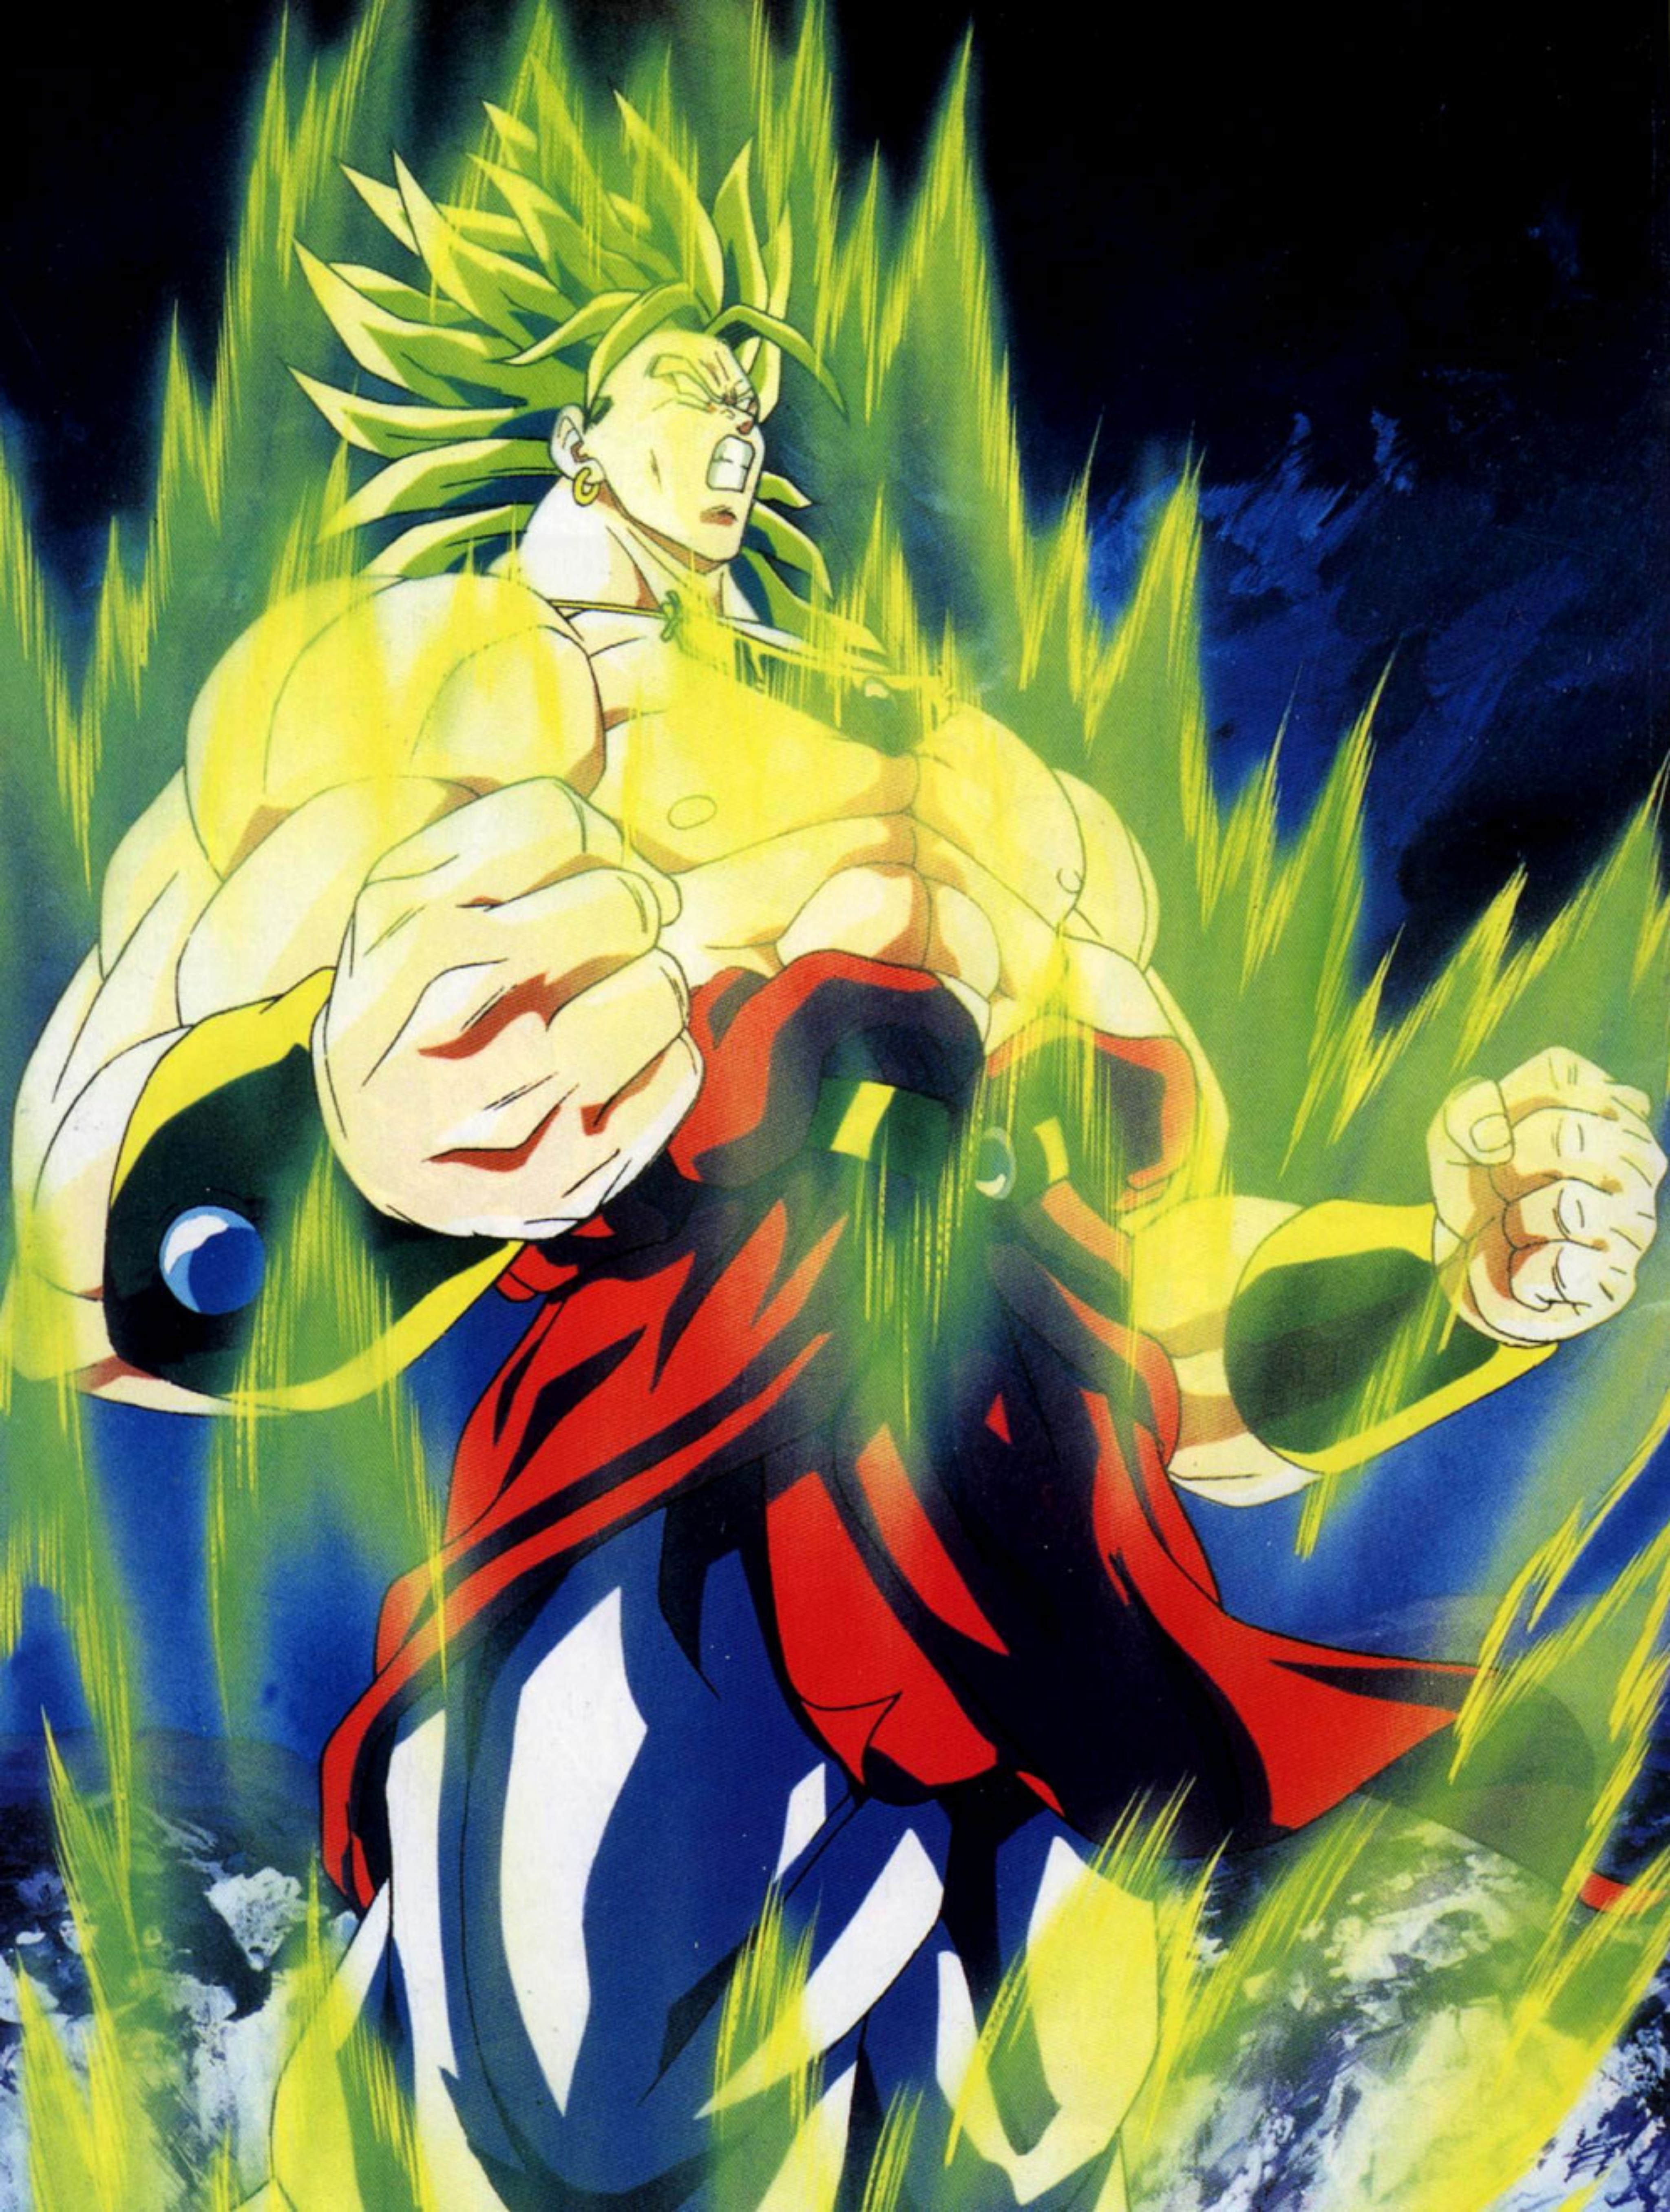 Does Garou's cosmic radiation really affects saiyans? (Seriously